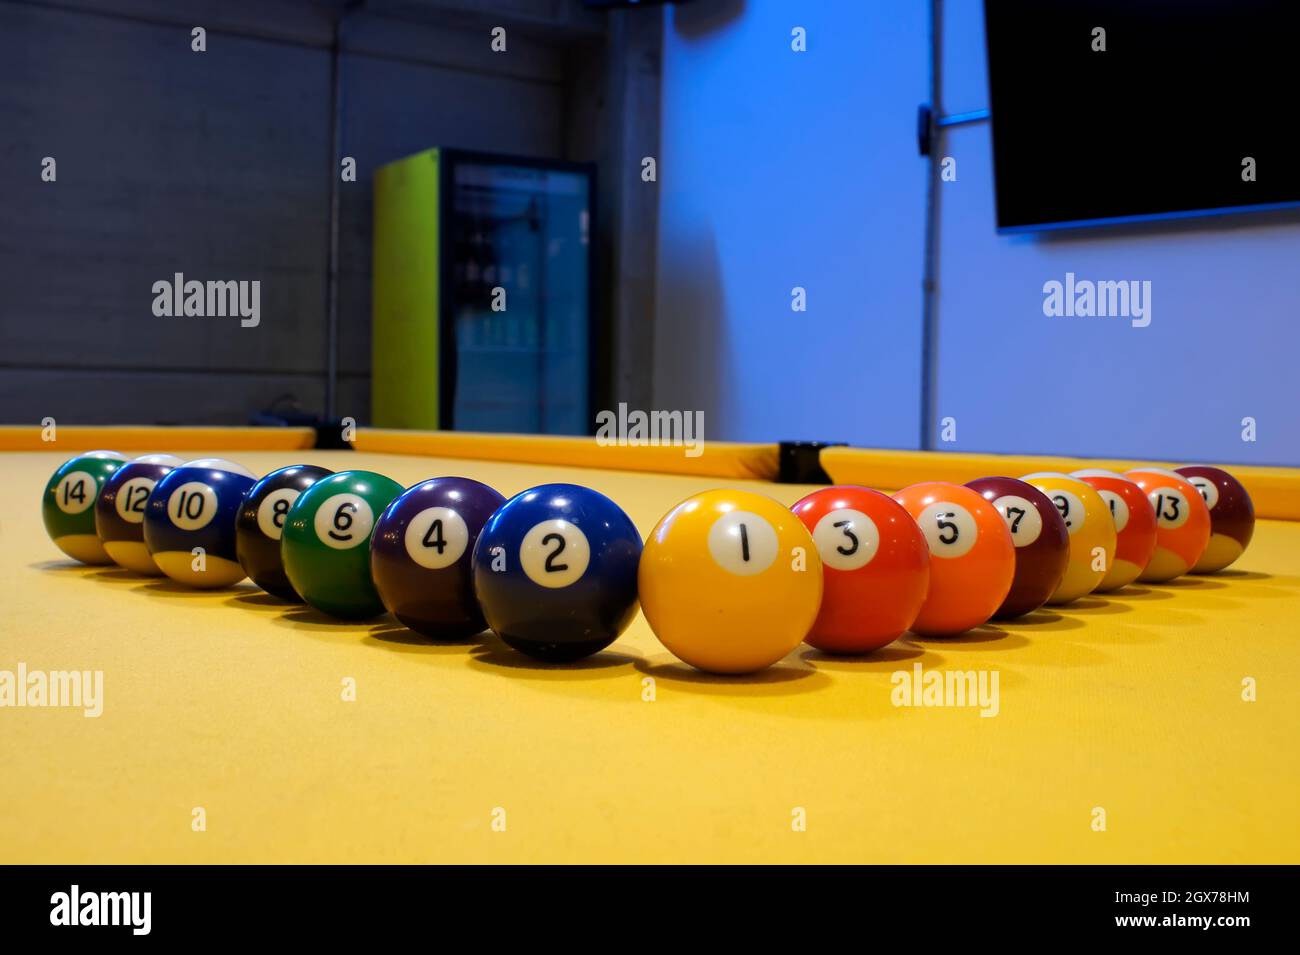 Billiard balls, odd on one side and even on the other. Stock Photo